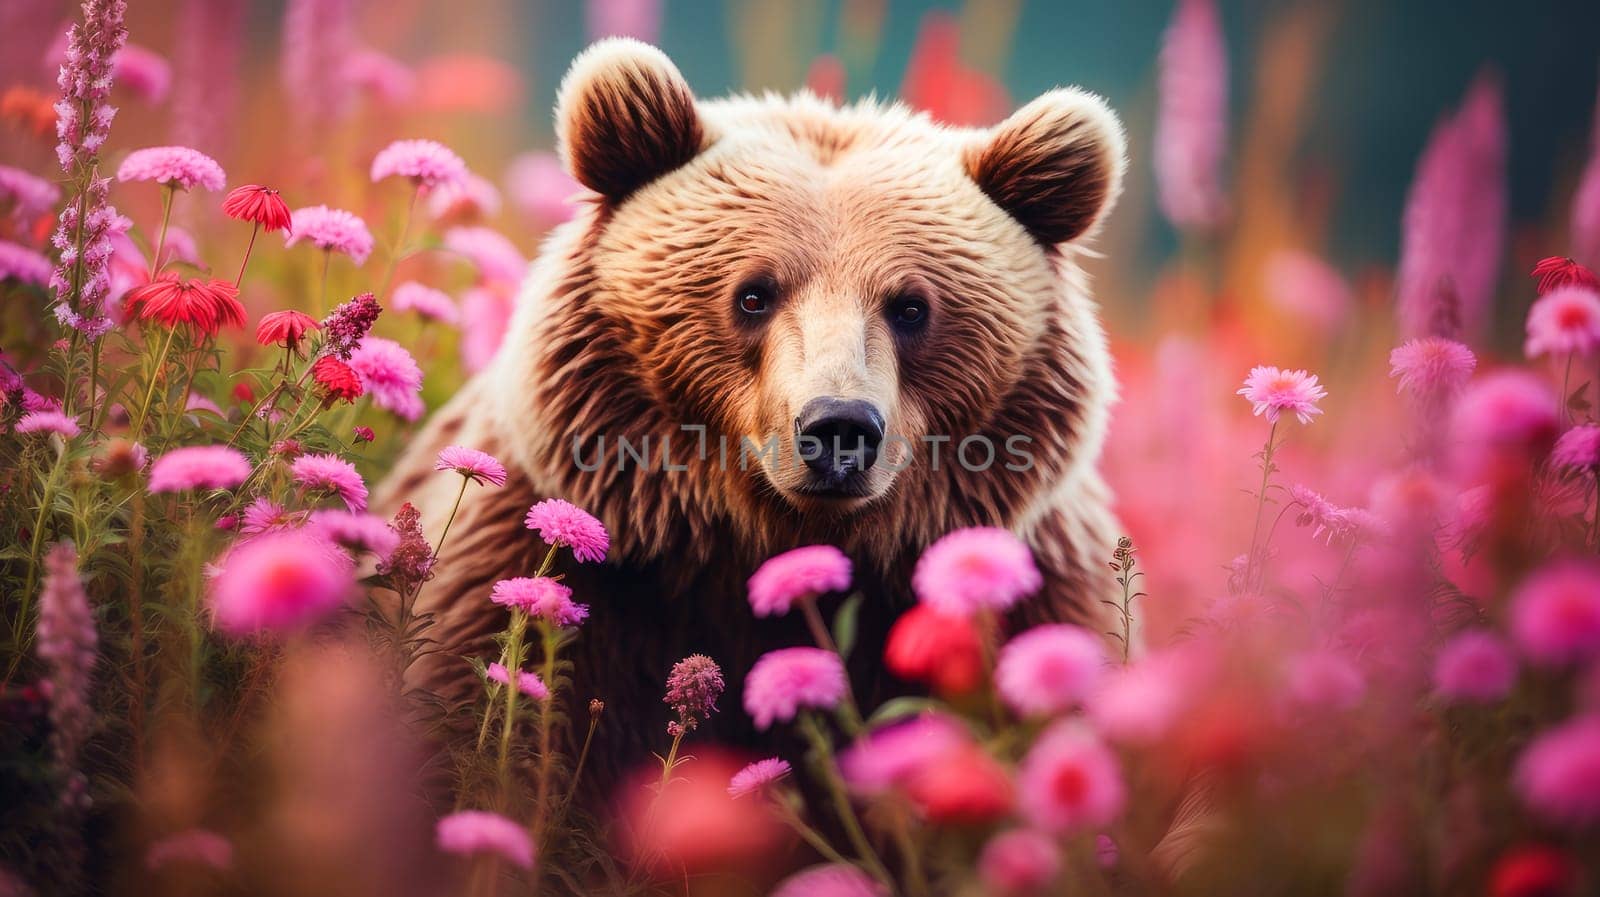 Cute, beautiful bear in a field with flowers in nature, in sunny pink rays. Environmental protection, nature pollution problem, wild animals. Advertising for a travel agency, pet store, veterinary clinic, phone screensaver, beautiful pictures, puzzle